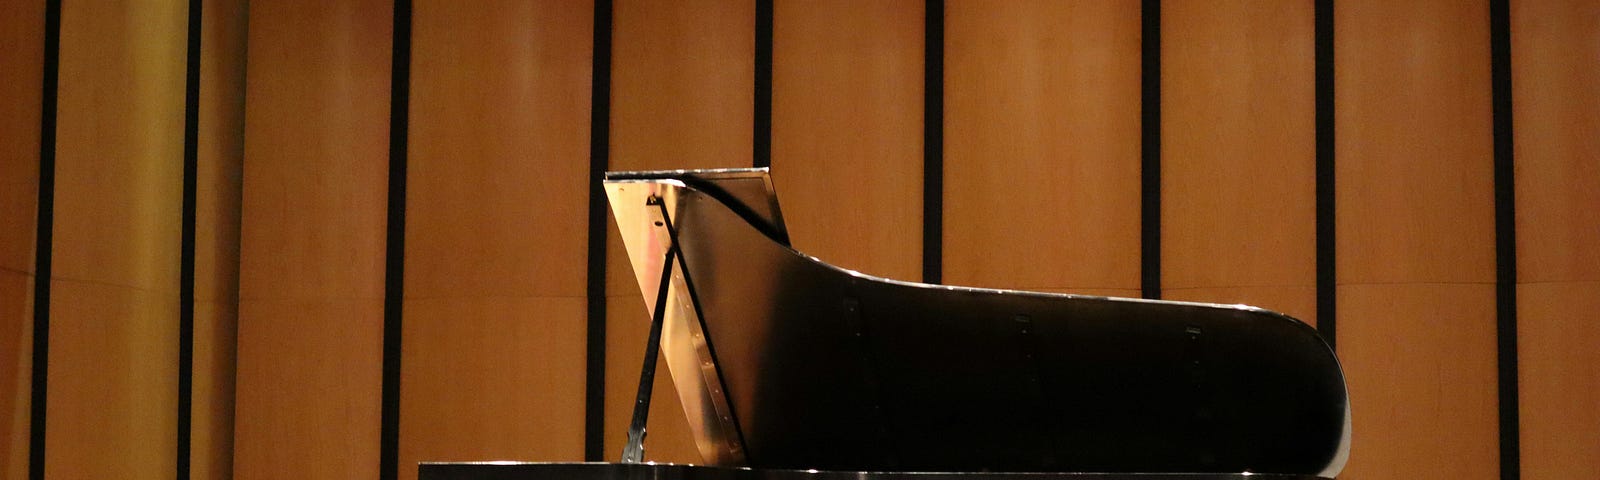 A solitary grand piano and a stool stand on the stage of a concert hall.